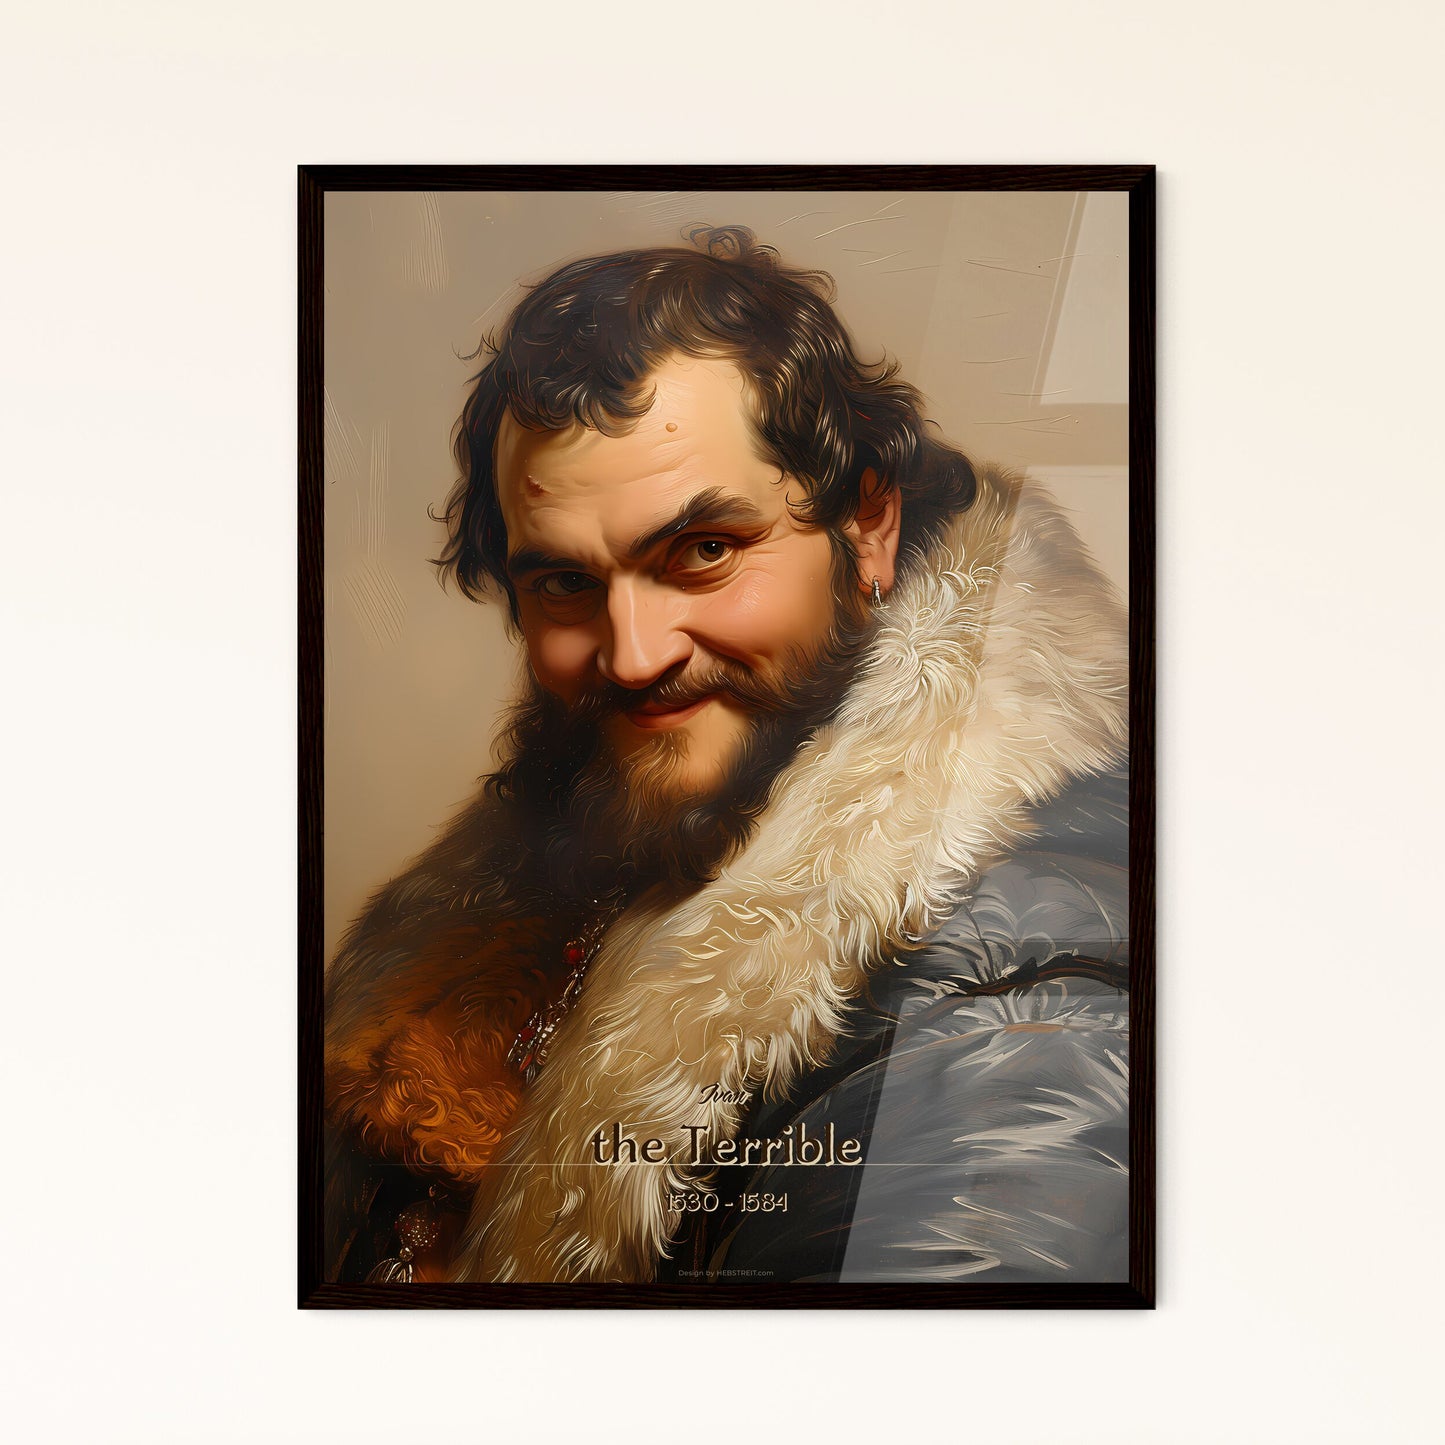 Ivan, the Terrible, 1530 - 1584, A Poster of a man with a beard and a fur collar Default Title